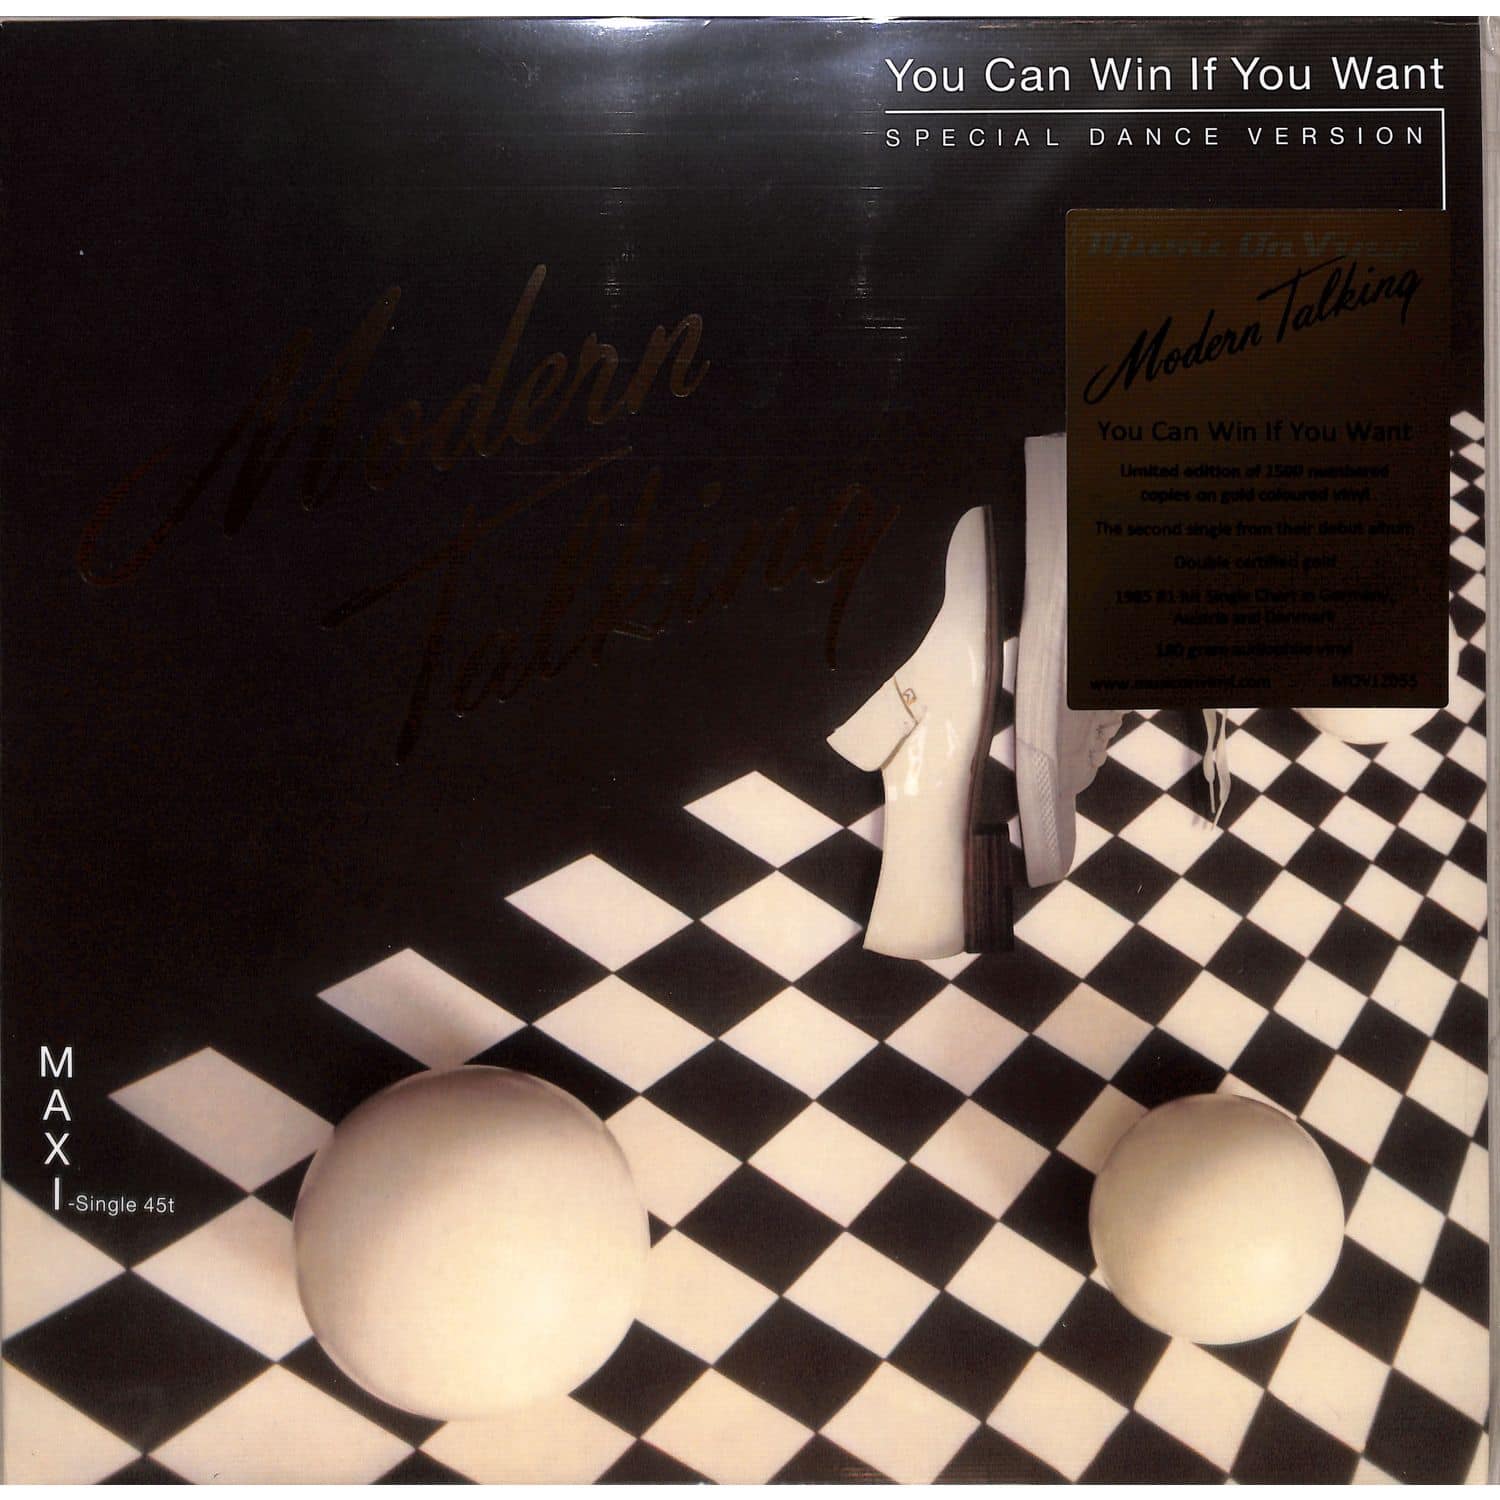 Modern Talking - YOU CAN WIN IF YOU WANT 